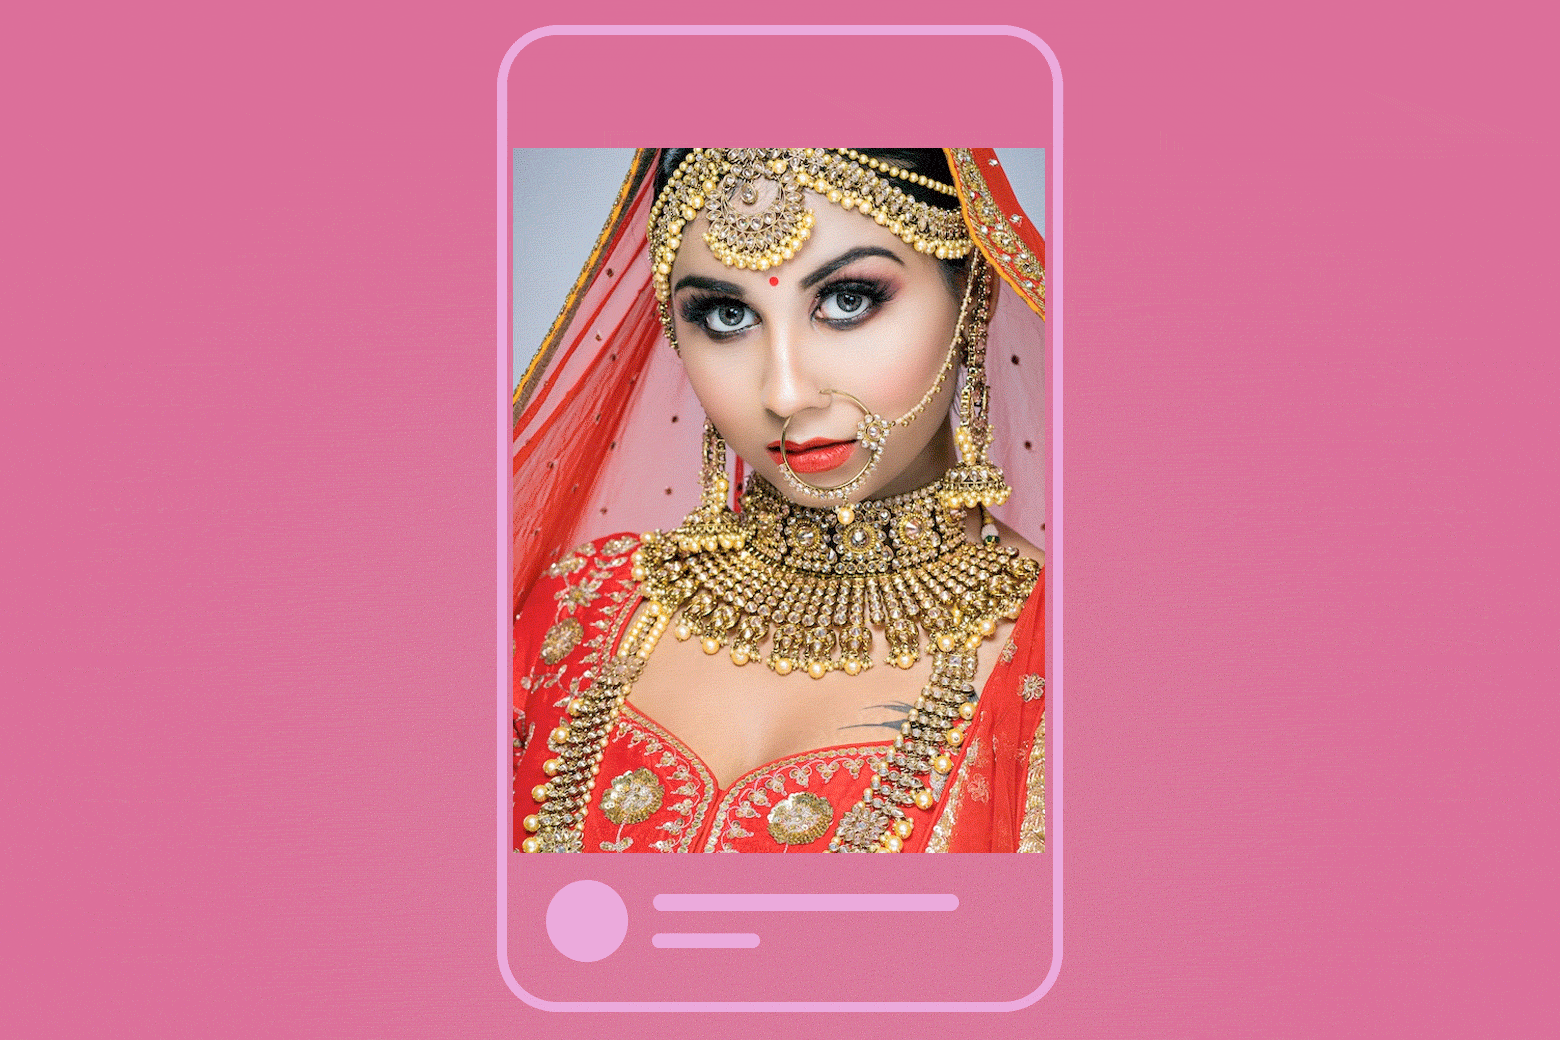 What it's like to use arranged marriage apps vs Tinder